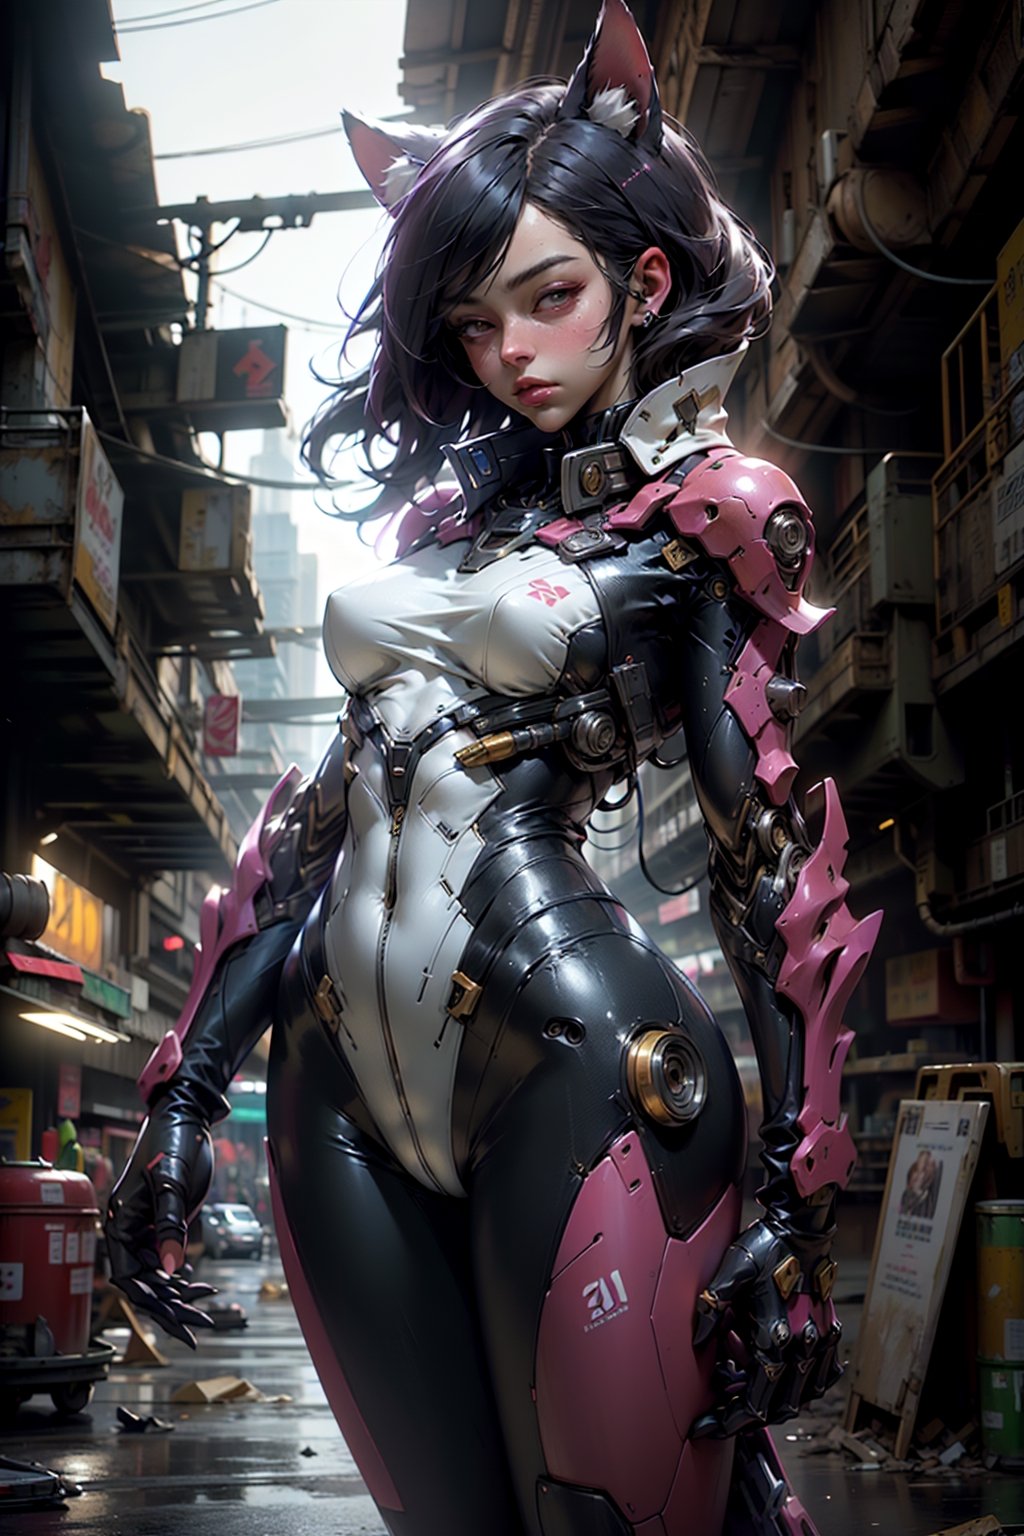 highres, Ultra HD, ultra detailed, cinematic poster, (1girl), Beautiful women with cat like ears wearing a suit (bodysuit) that is a tight fit. medium breasts, slime thicc,dressed in a dark red and purple mecha suit, stand in henshin pose, the background is a high-tech lighting scene of the future cyberpunk city, gleaming, sparkling light,wrenchsmechs,Mecha